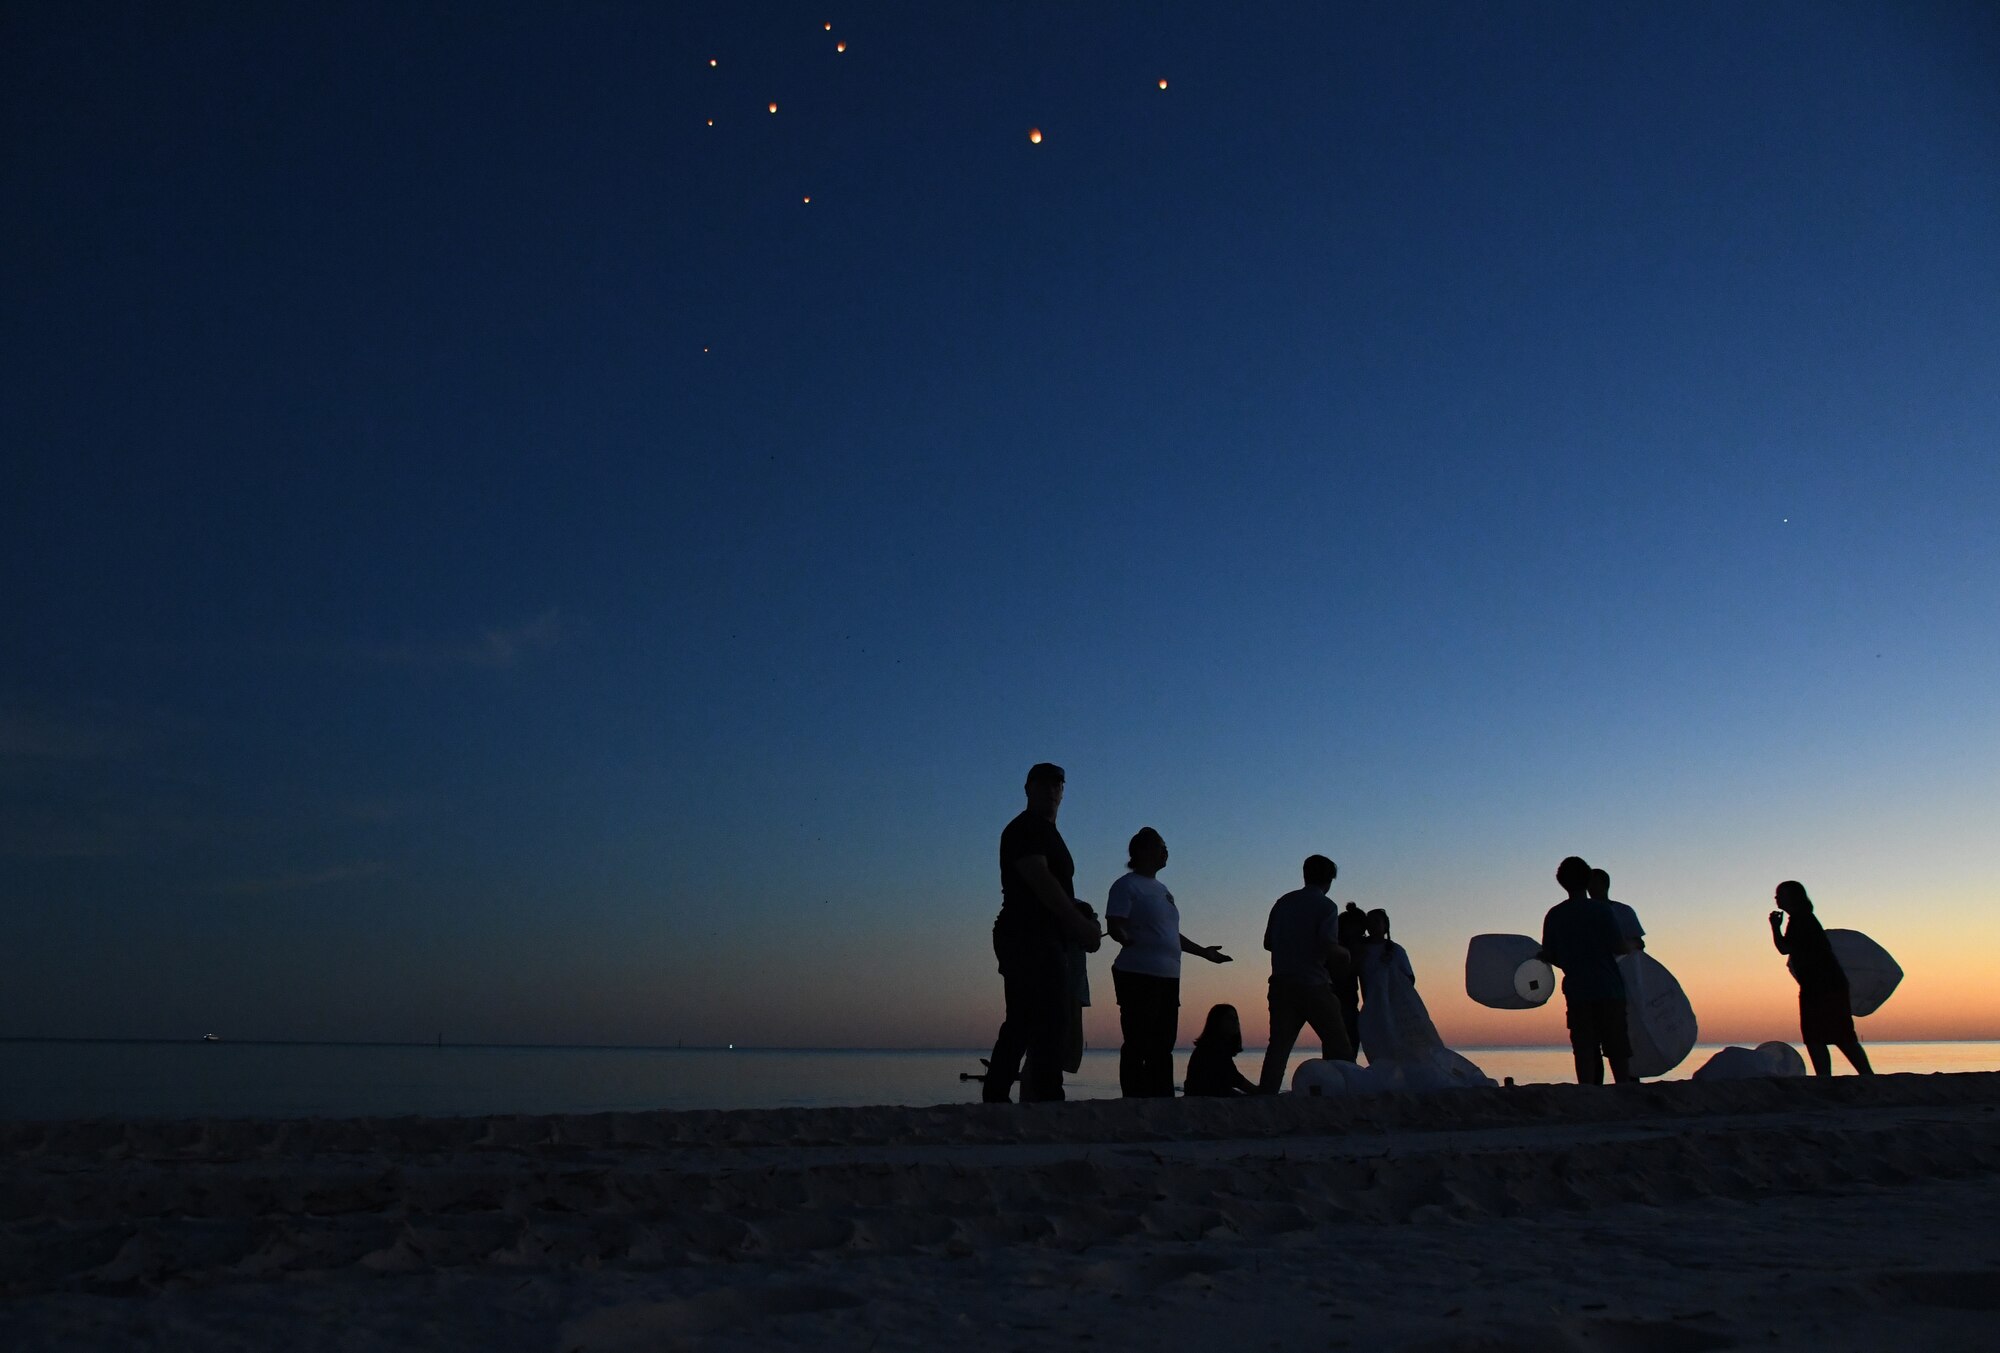 Military family members prepare to light and release lanterns during the Air Force Families Forever Fallen Hero Sky Lantern Lighting on the Biloxi Beach, Mississippi, Sept. 24, 2021. The event, hosted by Keesler Air Force Base, included eco-friendly sky lanterns released in honor of fallen heroes. (U.S. Air Force photo by Kemberly Groue)